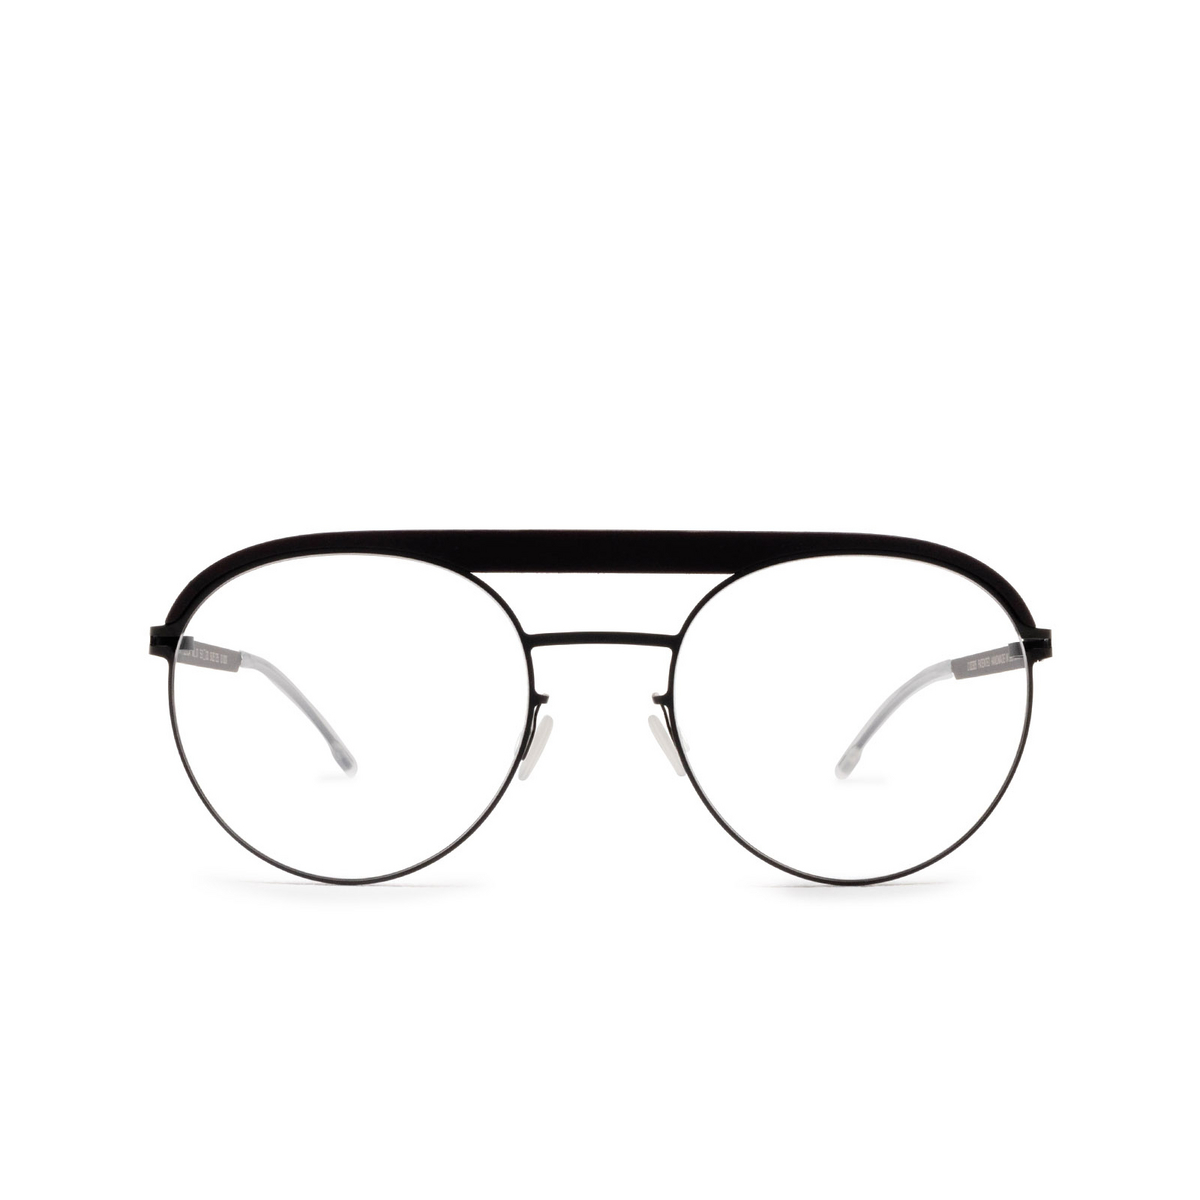 Mykita® Round Eyeglasses: ML01 color 305 Mh6 Pitch Black/black - front view